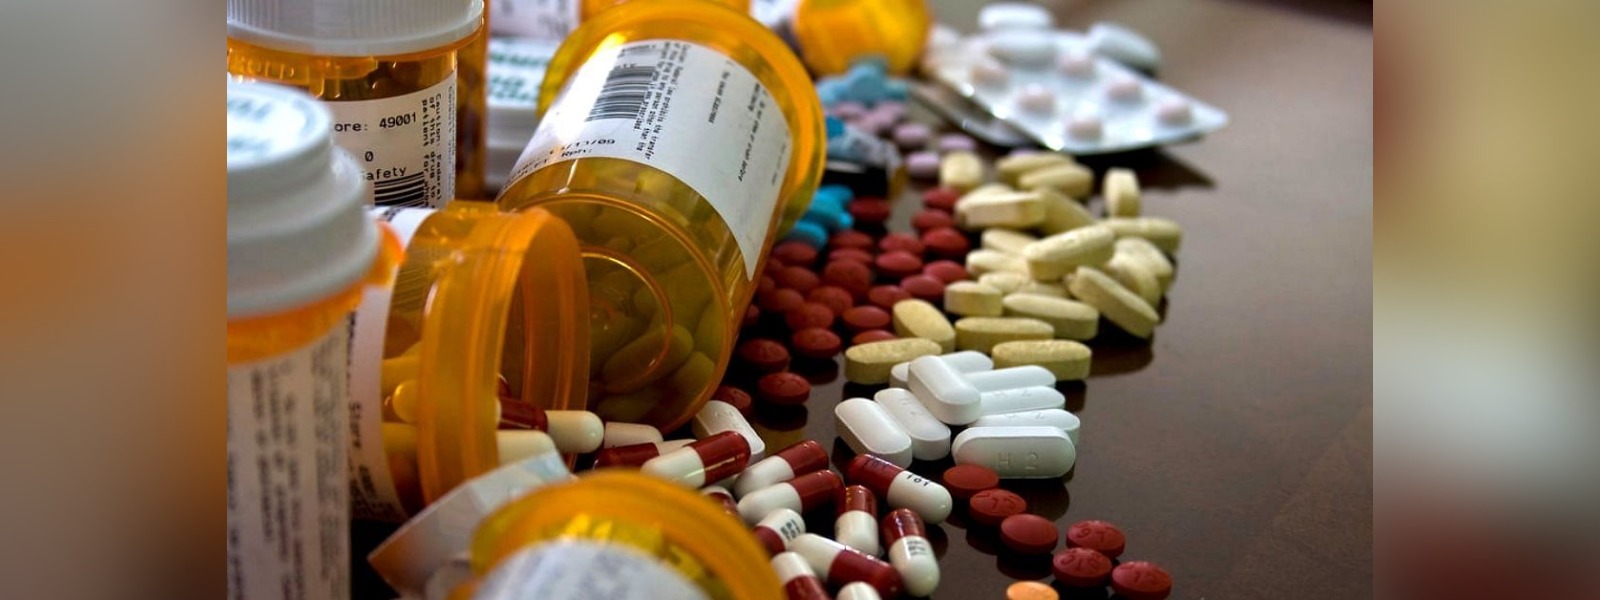 Shortage of medicines likely due to dollar crisis